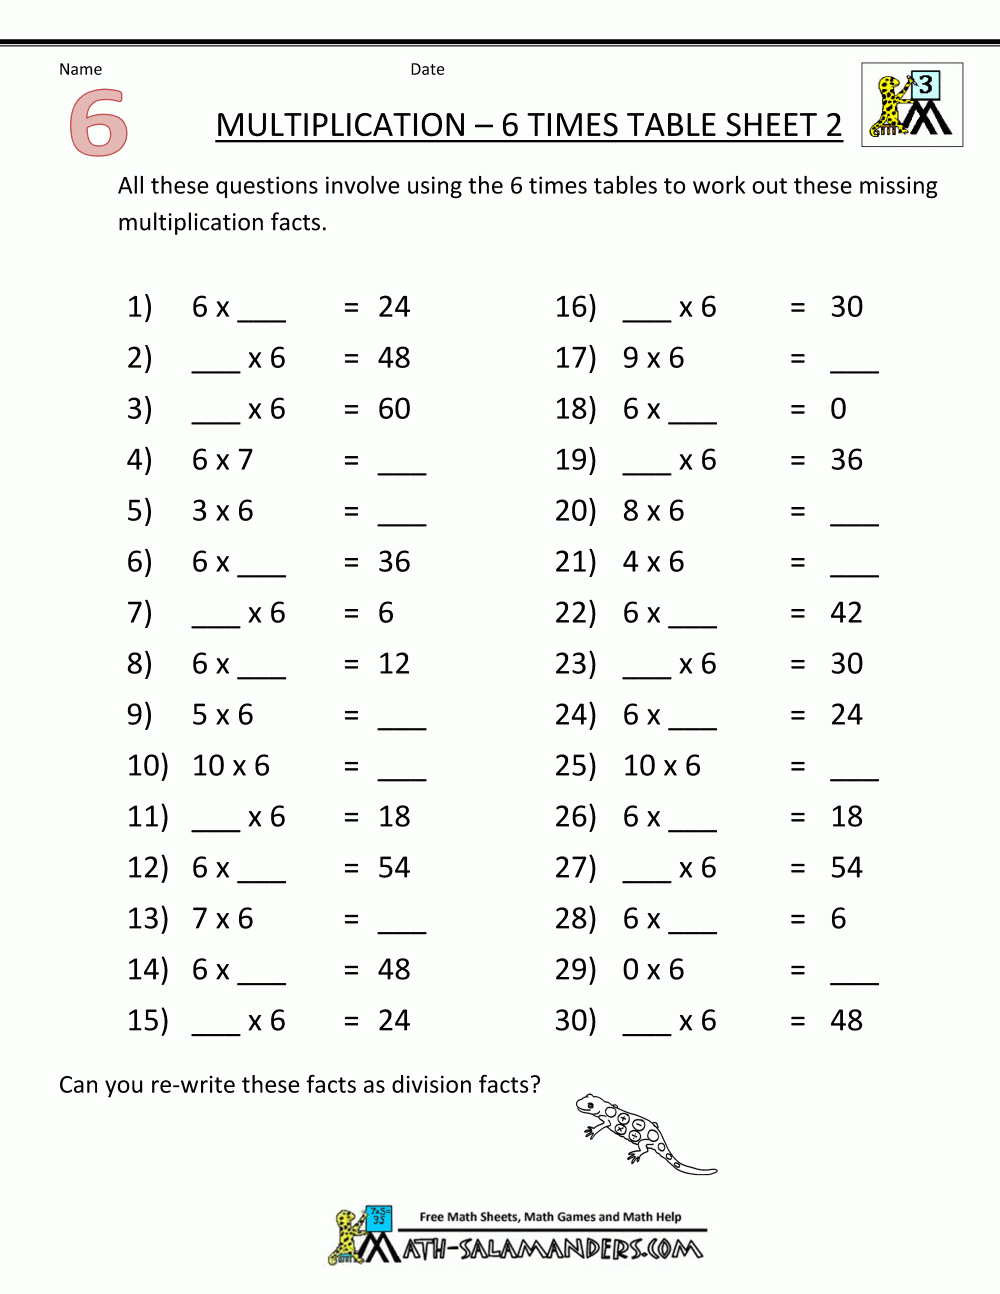 Multiplication Drill Sheets 3Rd Grade - 7Th Grade Math Worksheets Free Printable With Answers